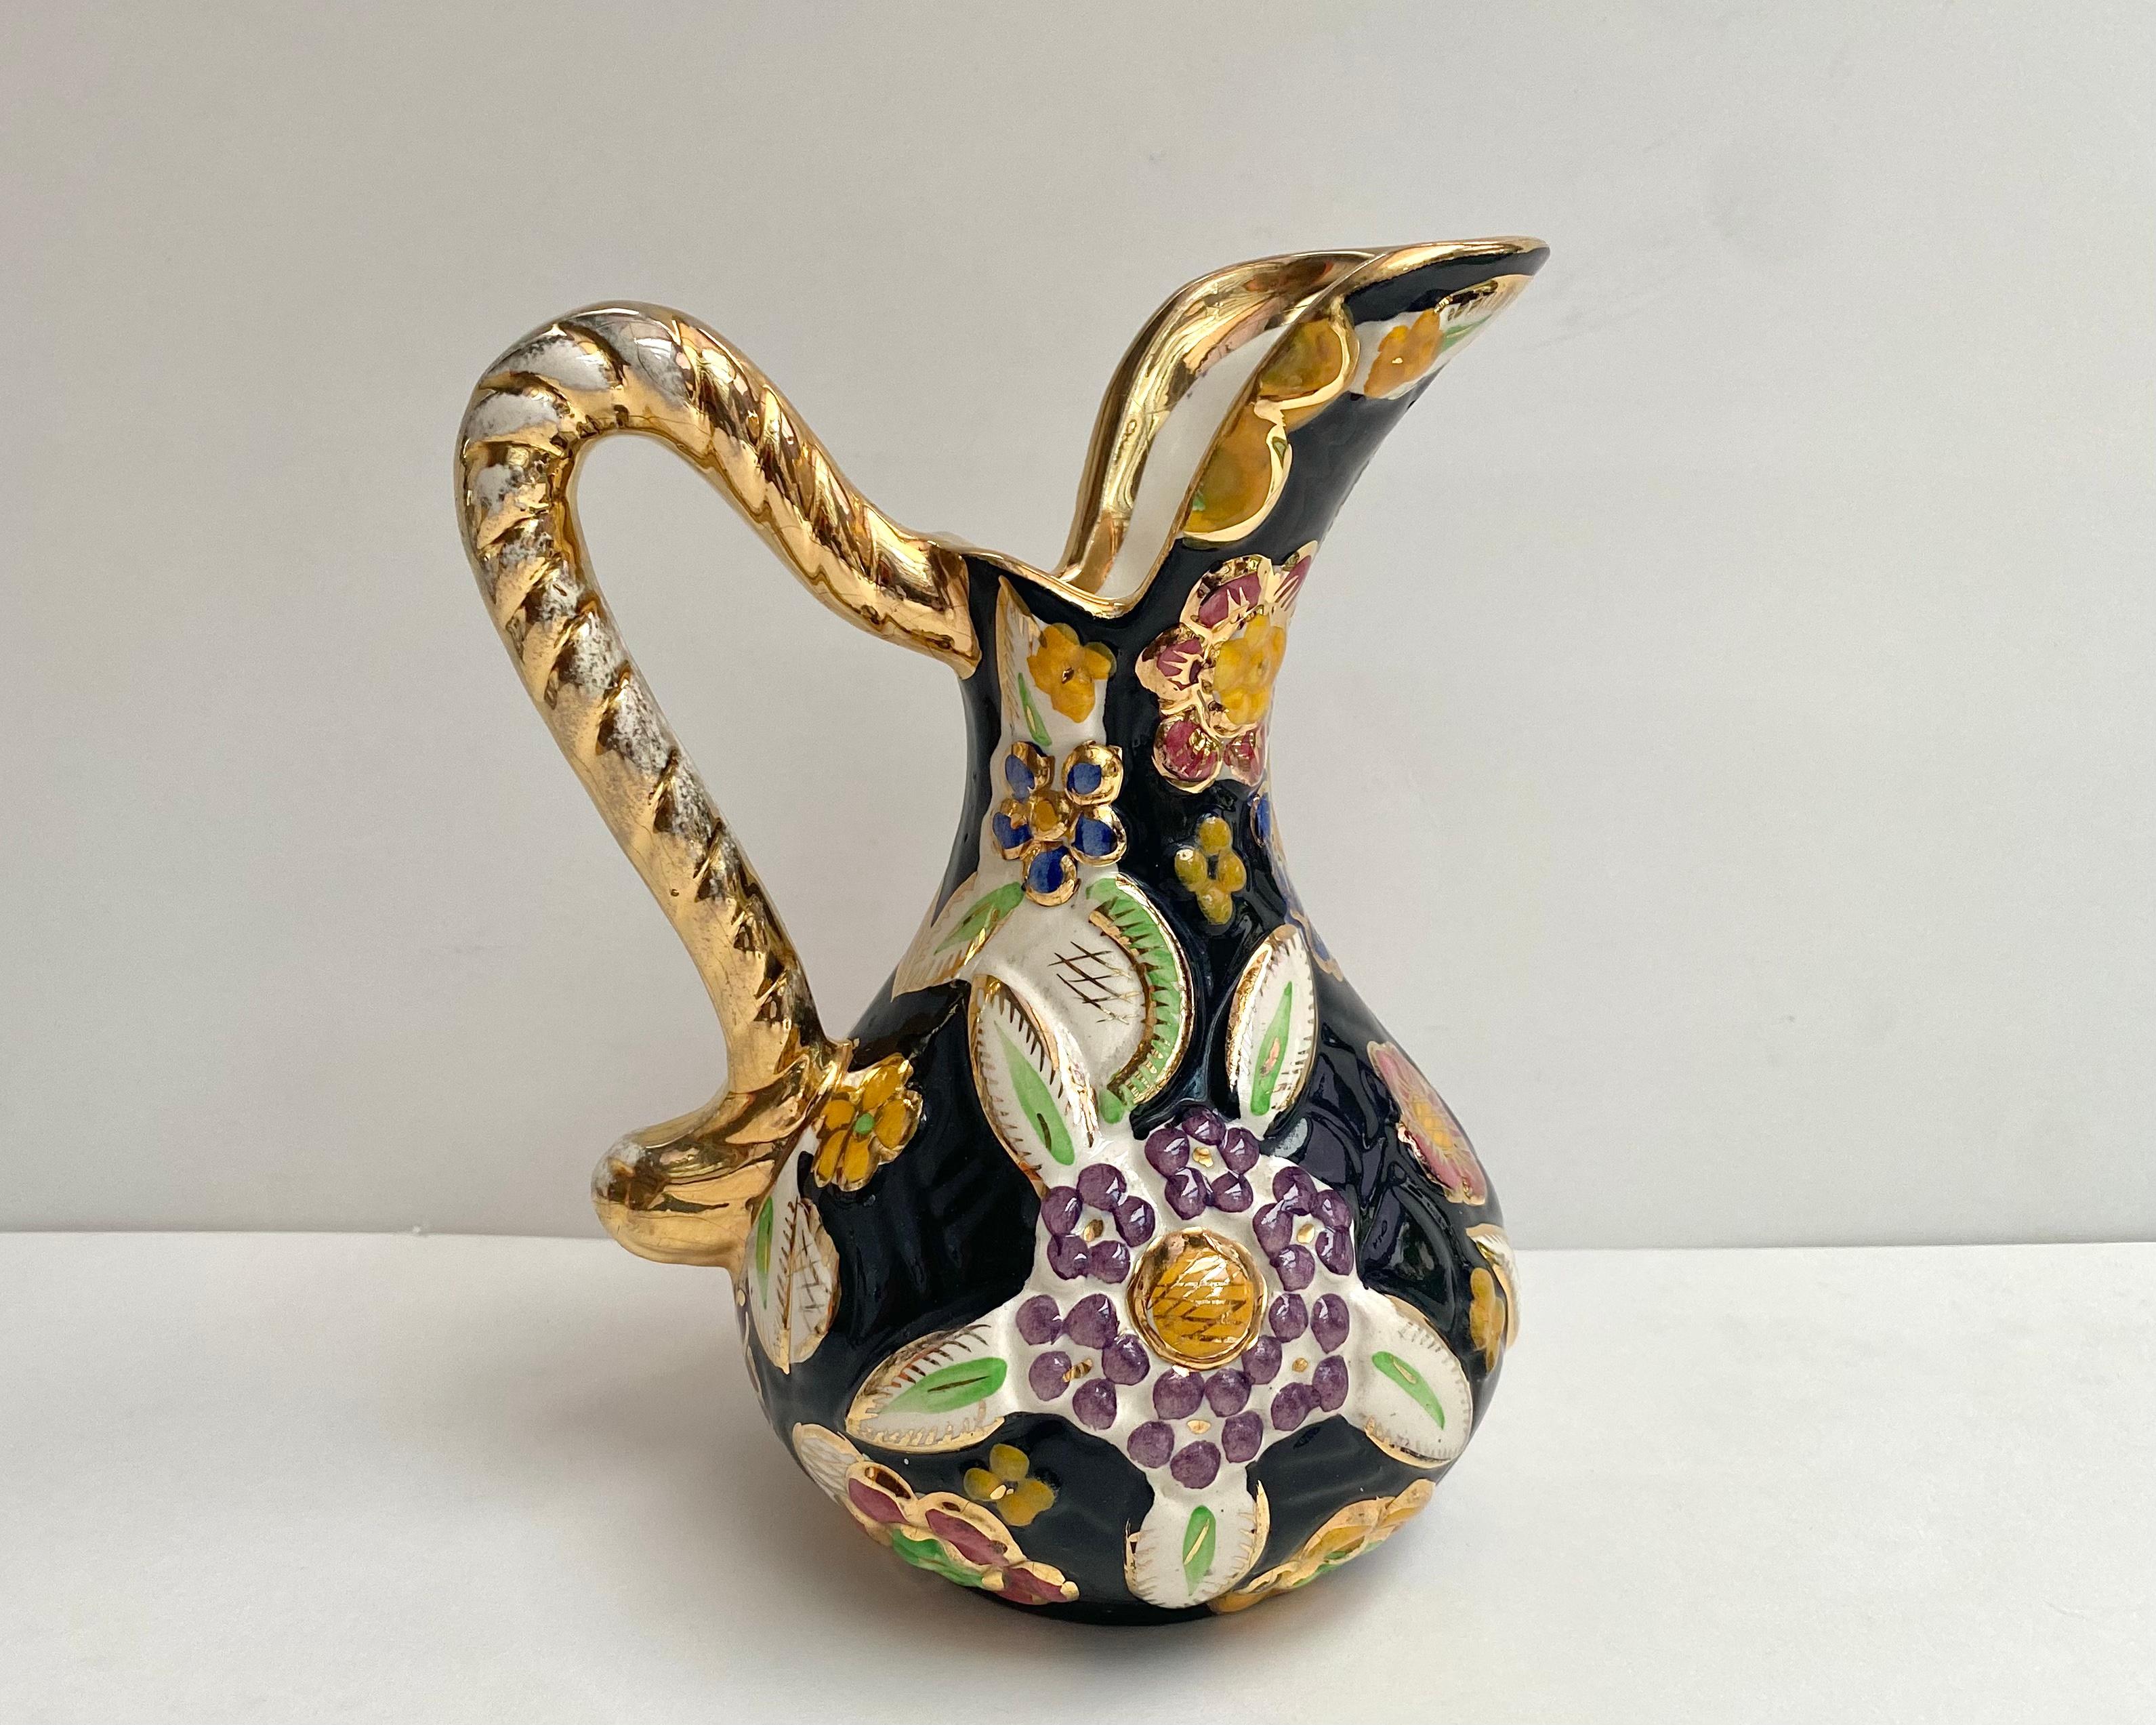 From the 1950s, attributed to Hubert Bequet Quaregnon ceramic pitcher/vase with a beautifull black background decorated with a bright colorful raised enamel pattern of a colorful flowers.

  All hand crafted and hand painted.  

All accents in 24k